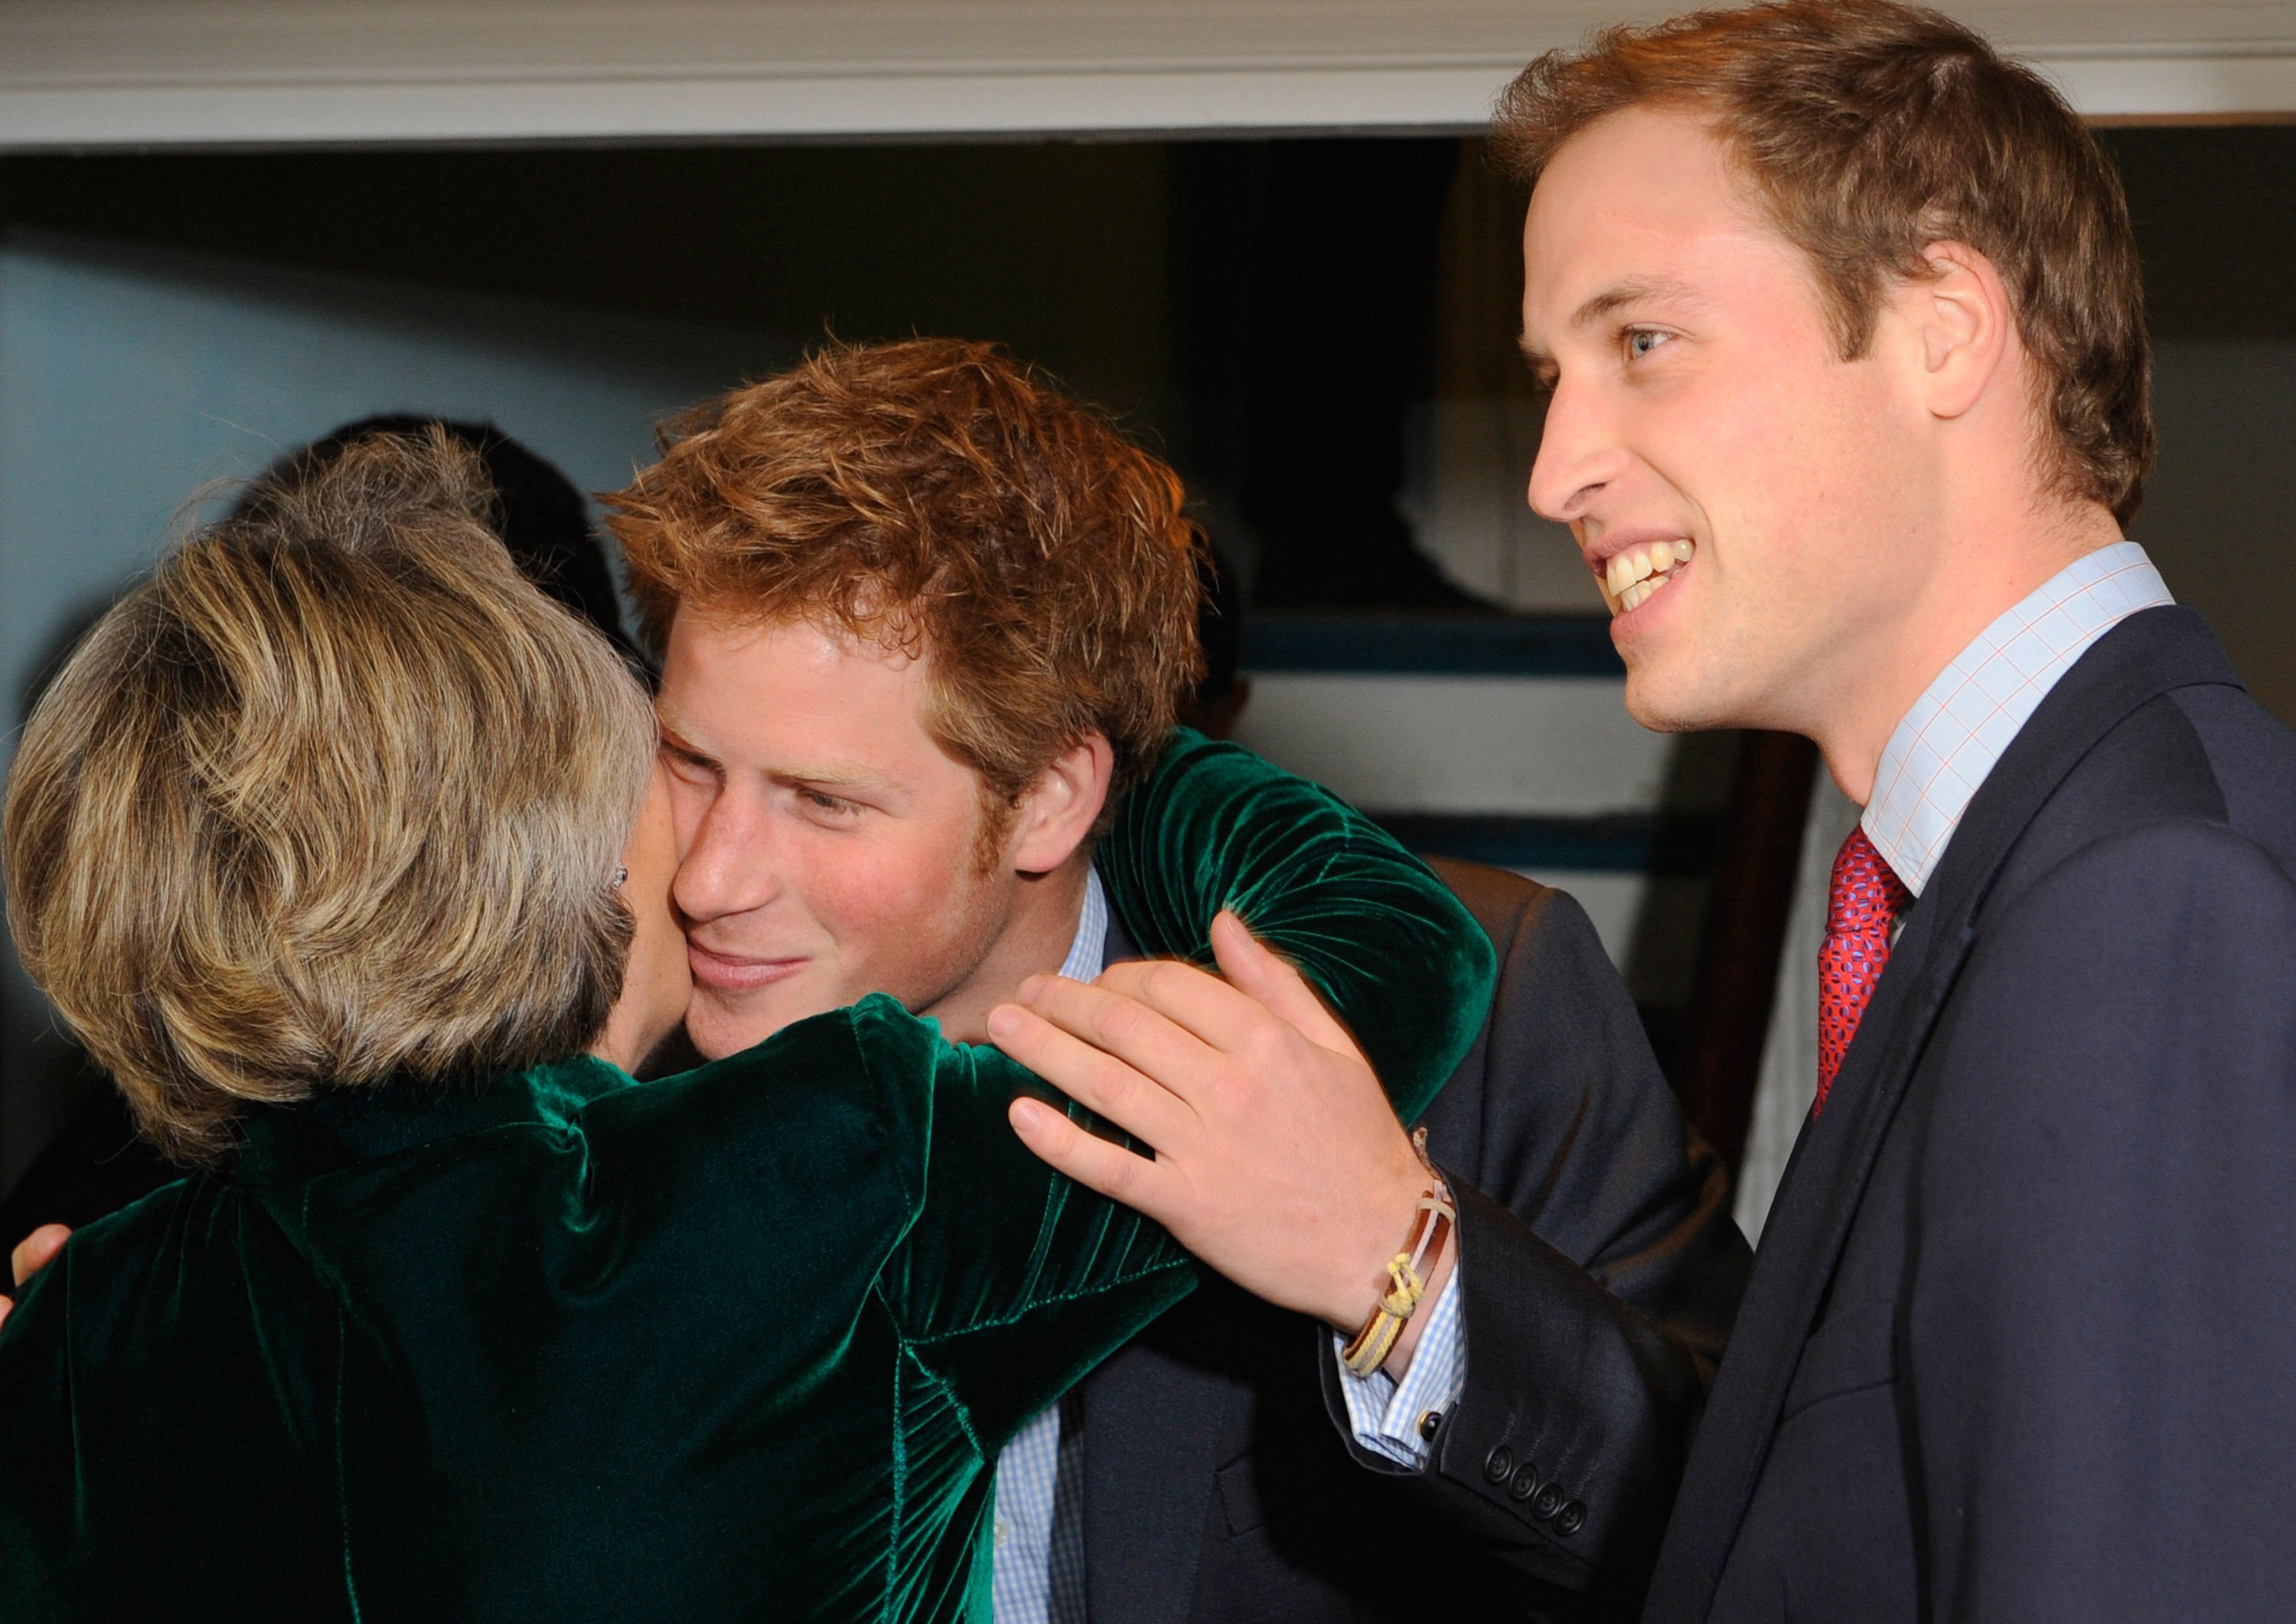 Prince Harry embracing Claire van Straubenzee as his brother Prince William looks on at the formal launch of the Henry Van Straubenzee Memorial Fund in 2009. Photo: WPA/Getty Images